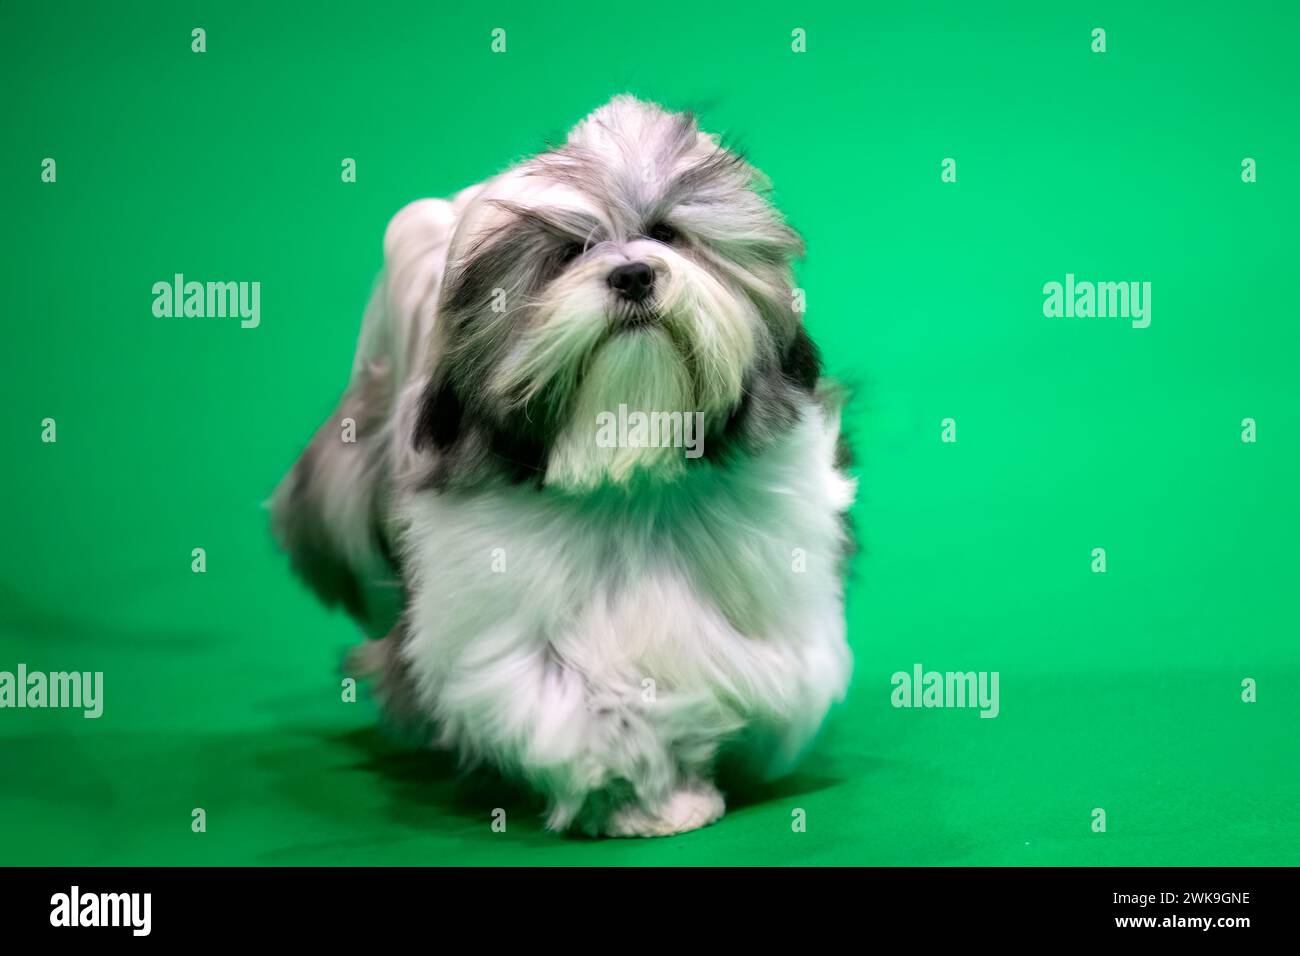 Long haired Lhasa Apso puppy dog at Crufts dog show walking on green carpet Stock Photo